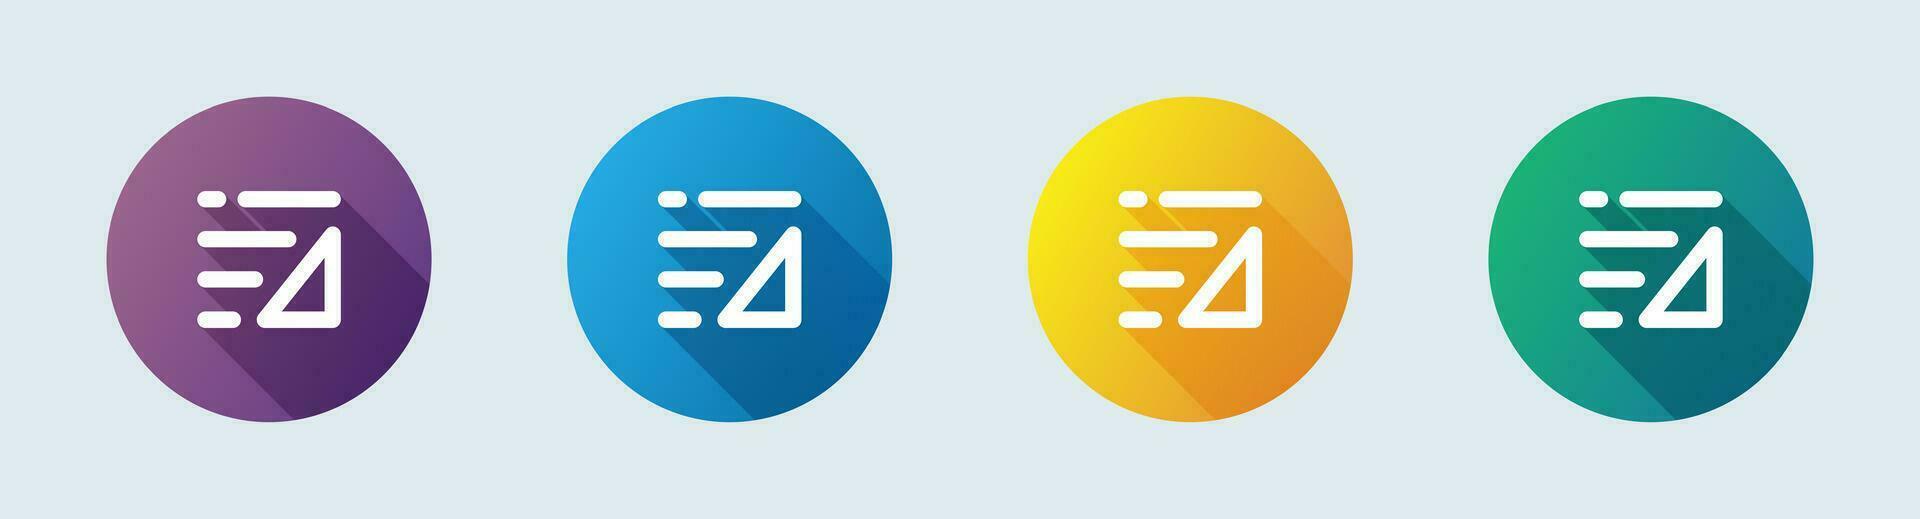 Sort line icon in flat design style. Filter signs vector illustration.